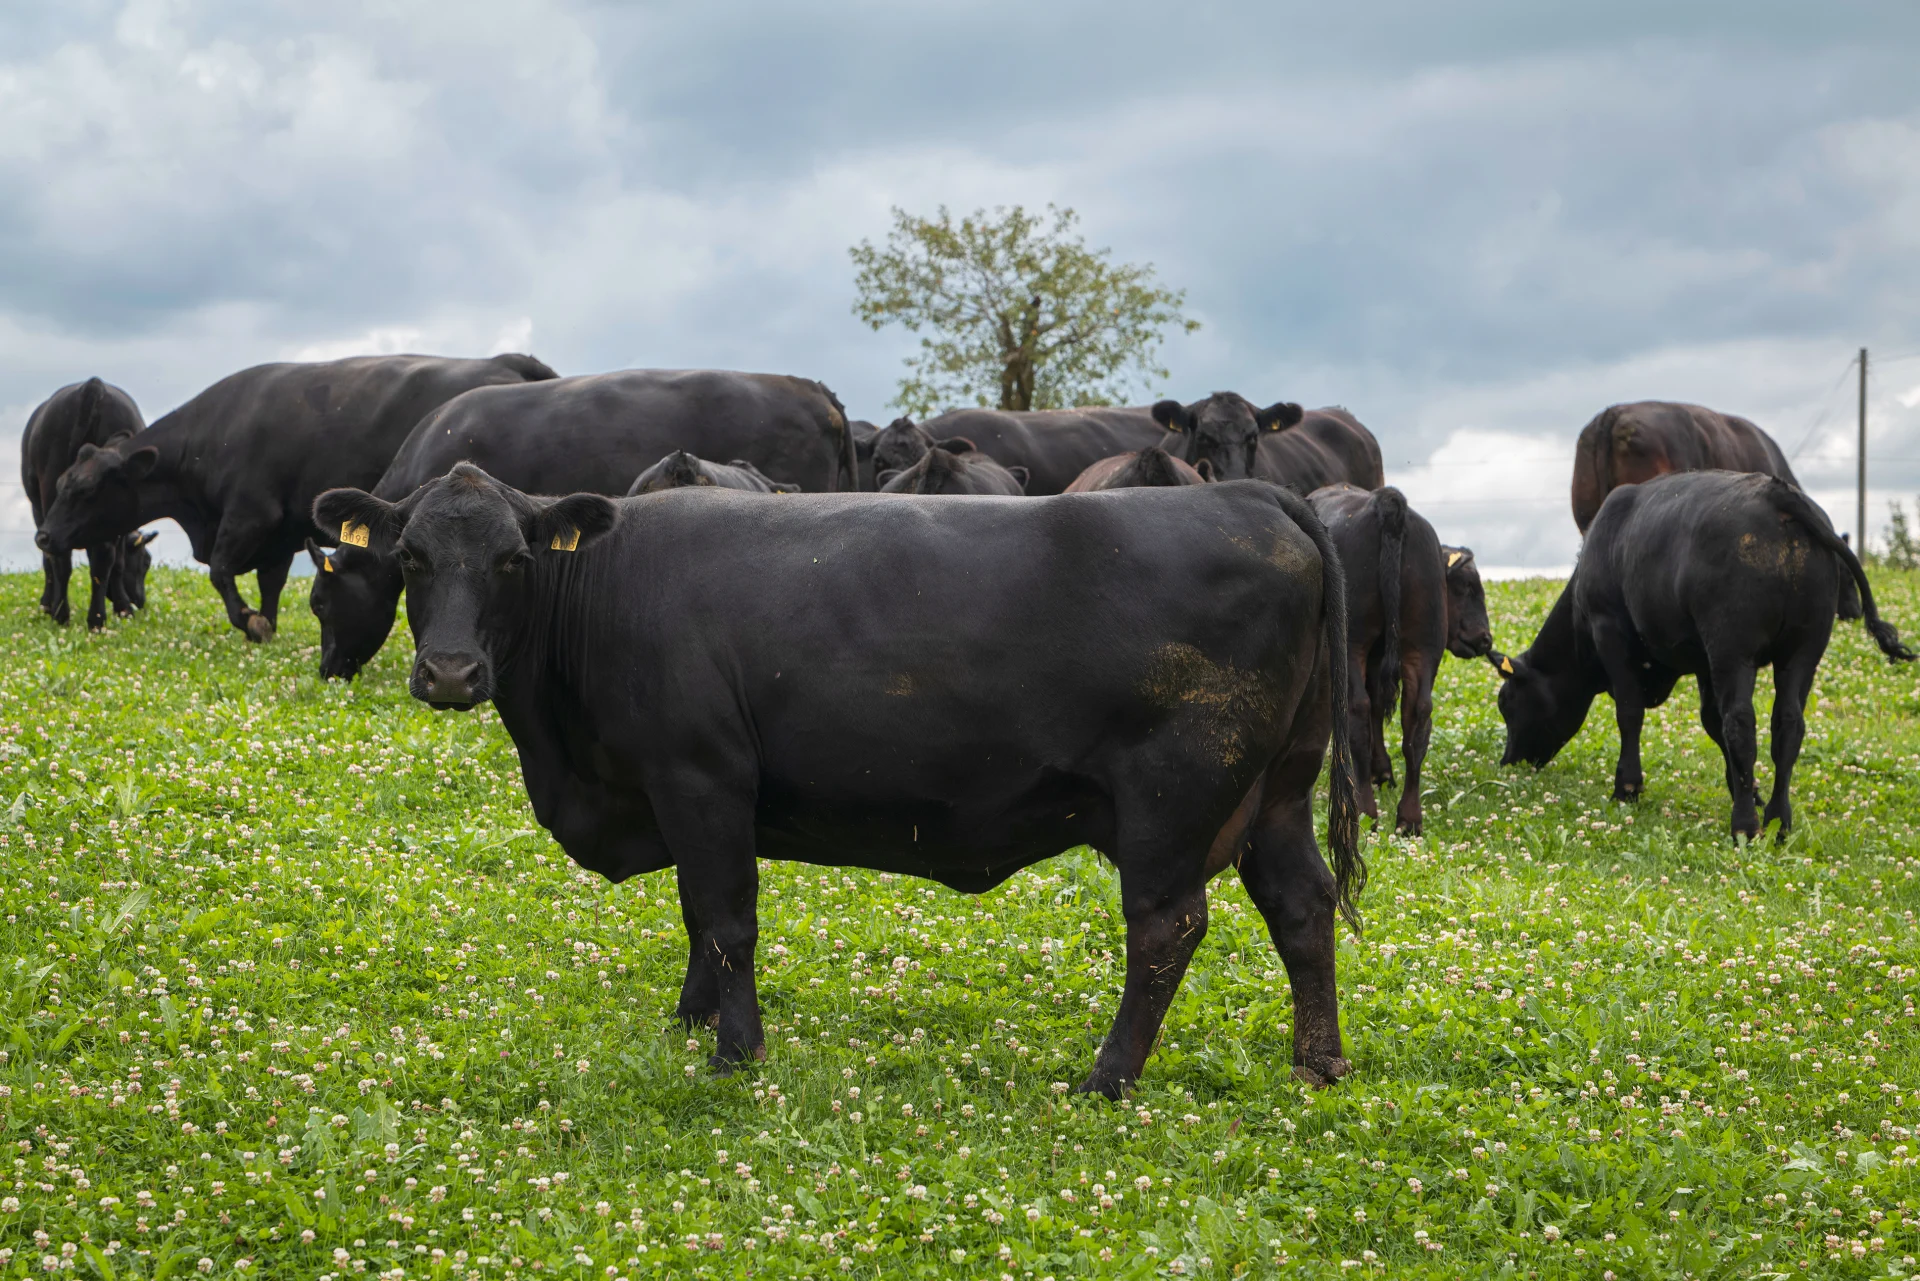 A single cow stands in the foreground in the pasture, the others are in the background.